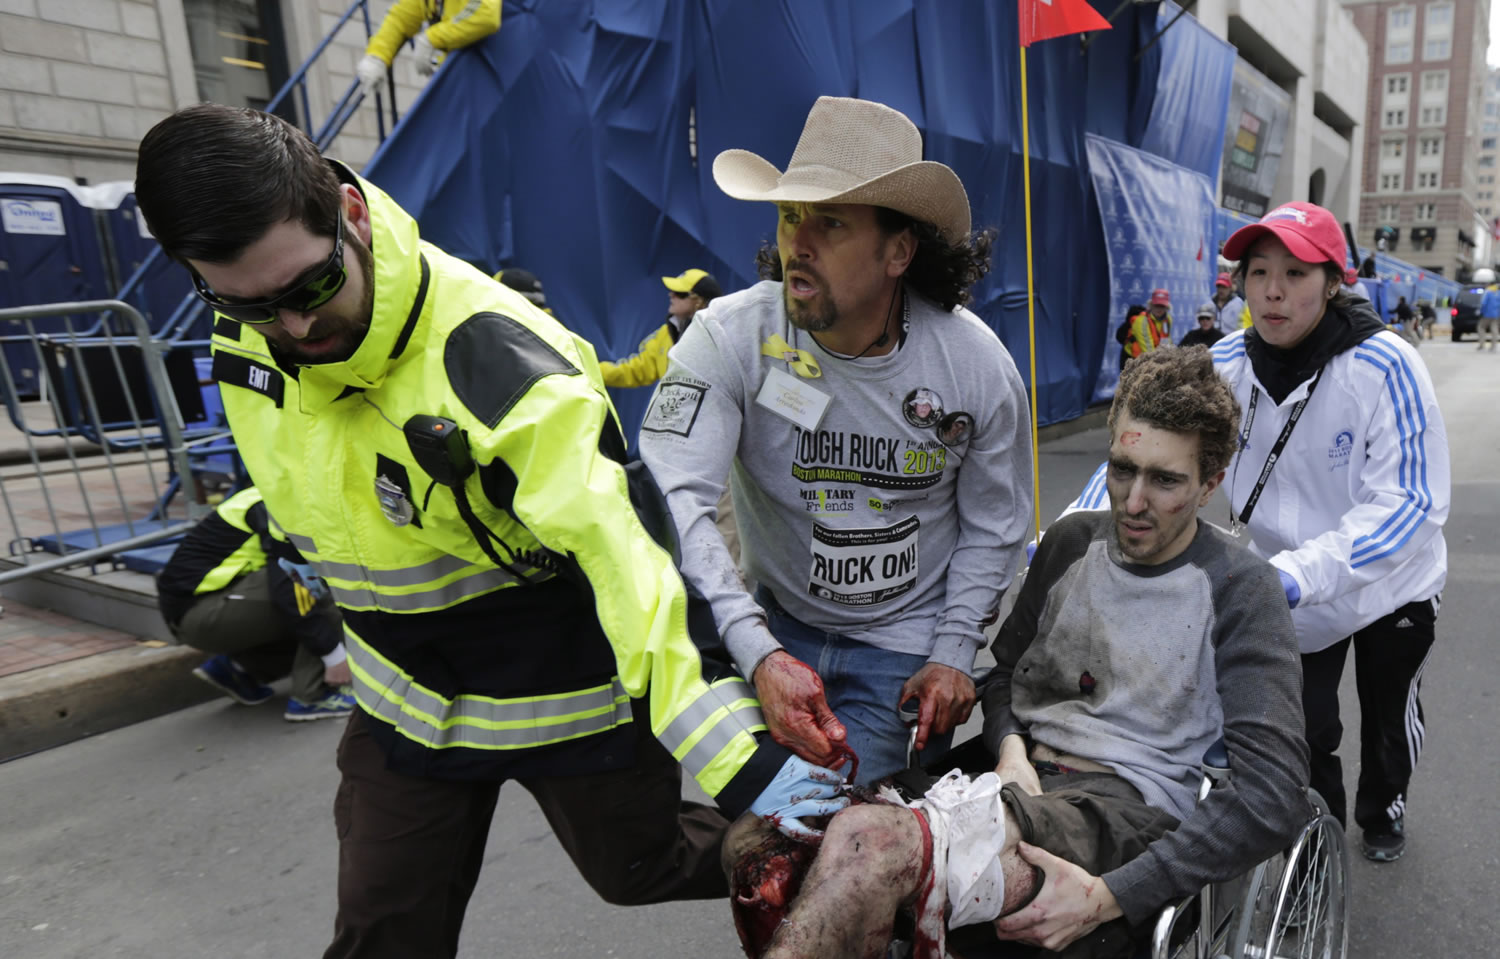 Medical responders run bombing victim Jeff Bauman past the finish line of the 2013 Boston Marathon following one of the explosions Monday in Boston.